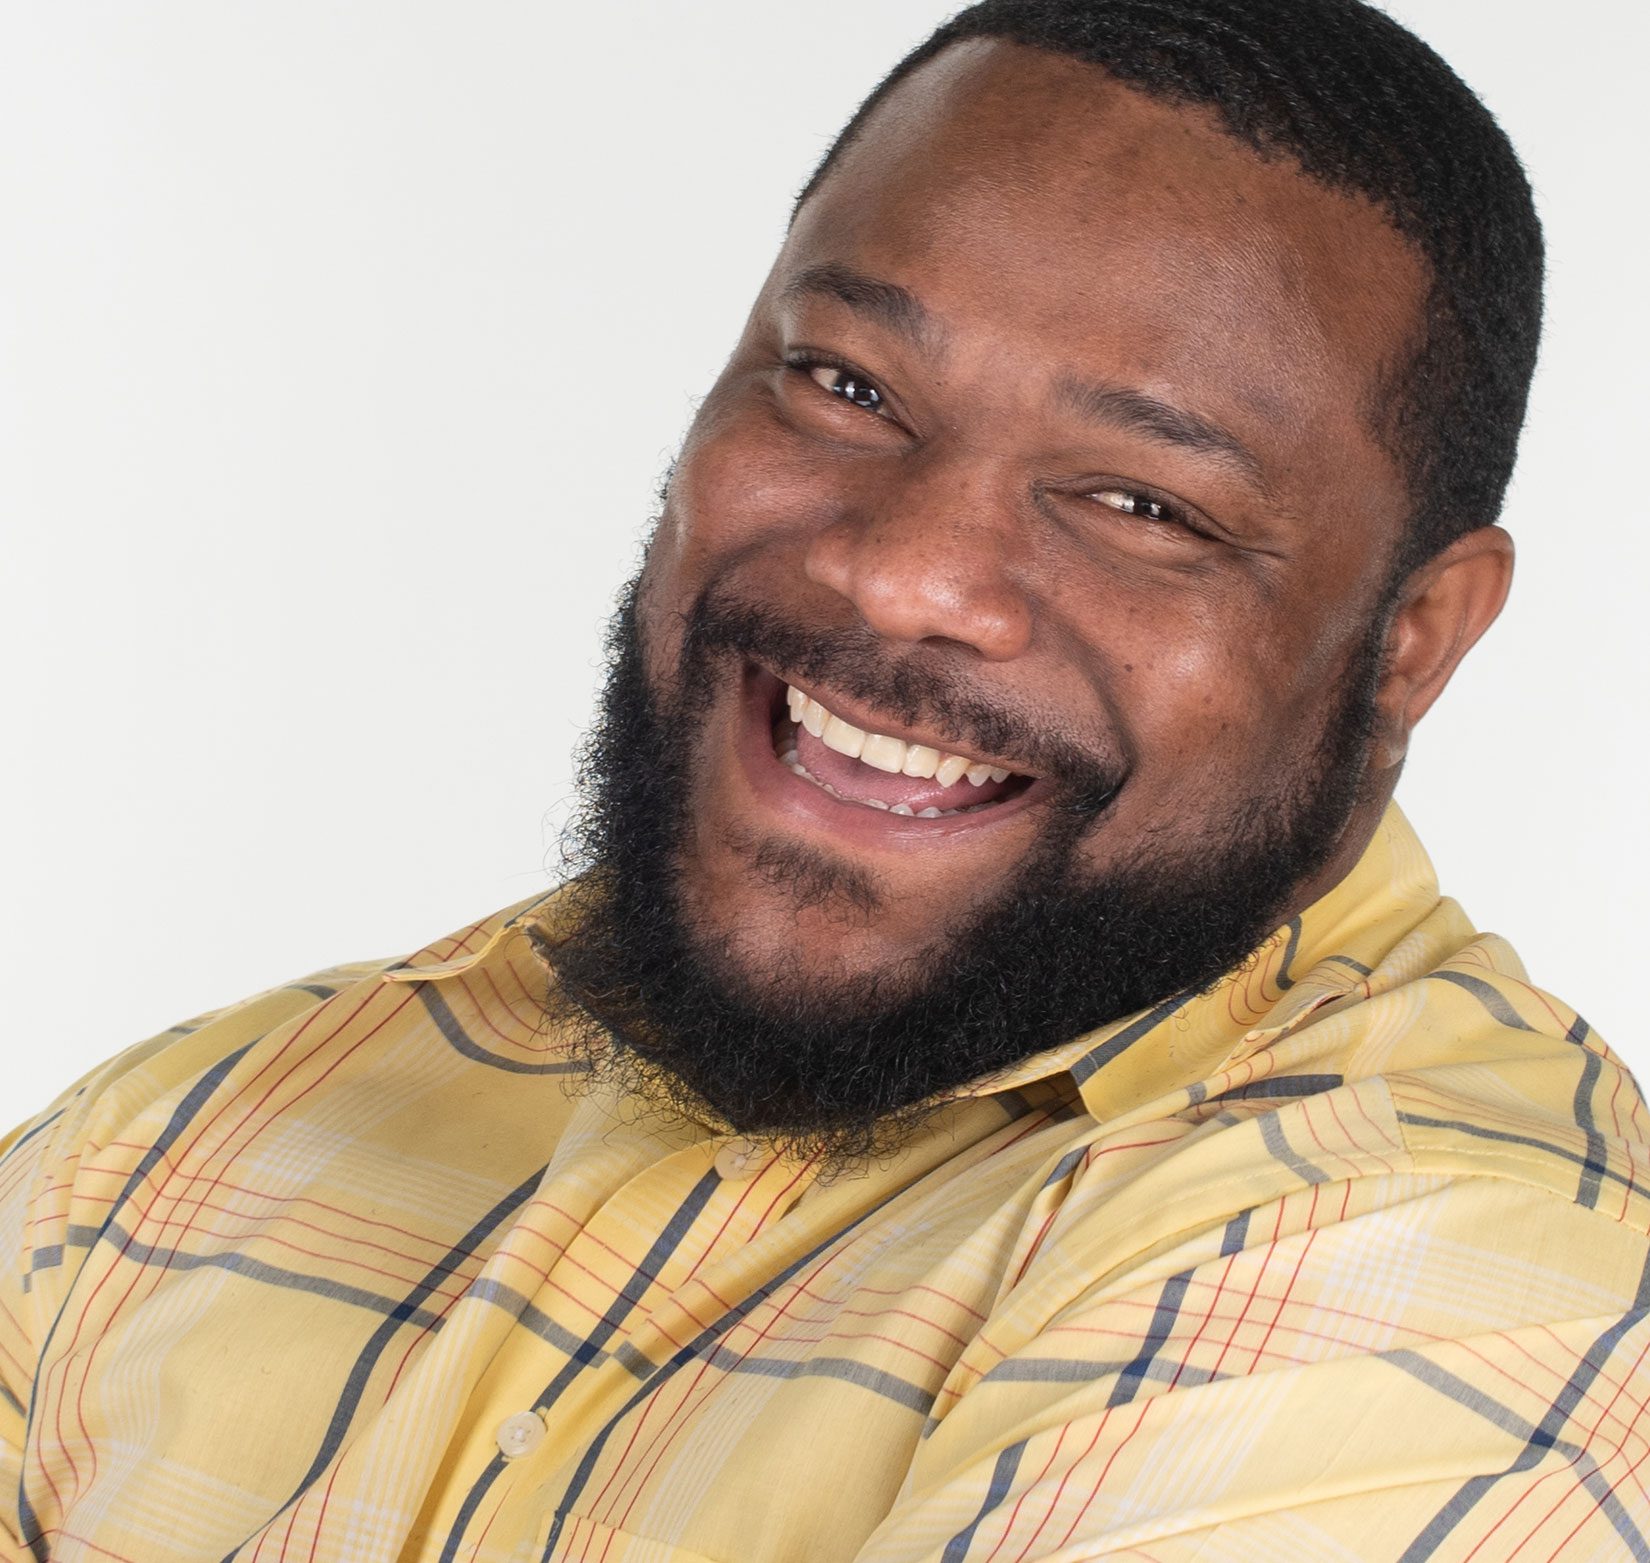 A professional headshot of a middle-aged black male smiling widely